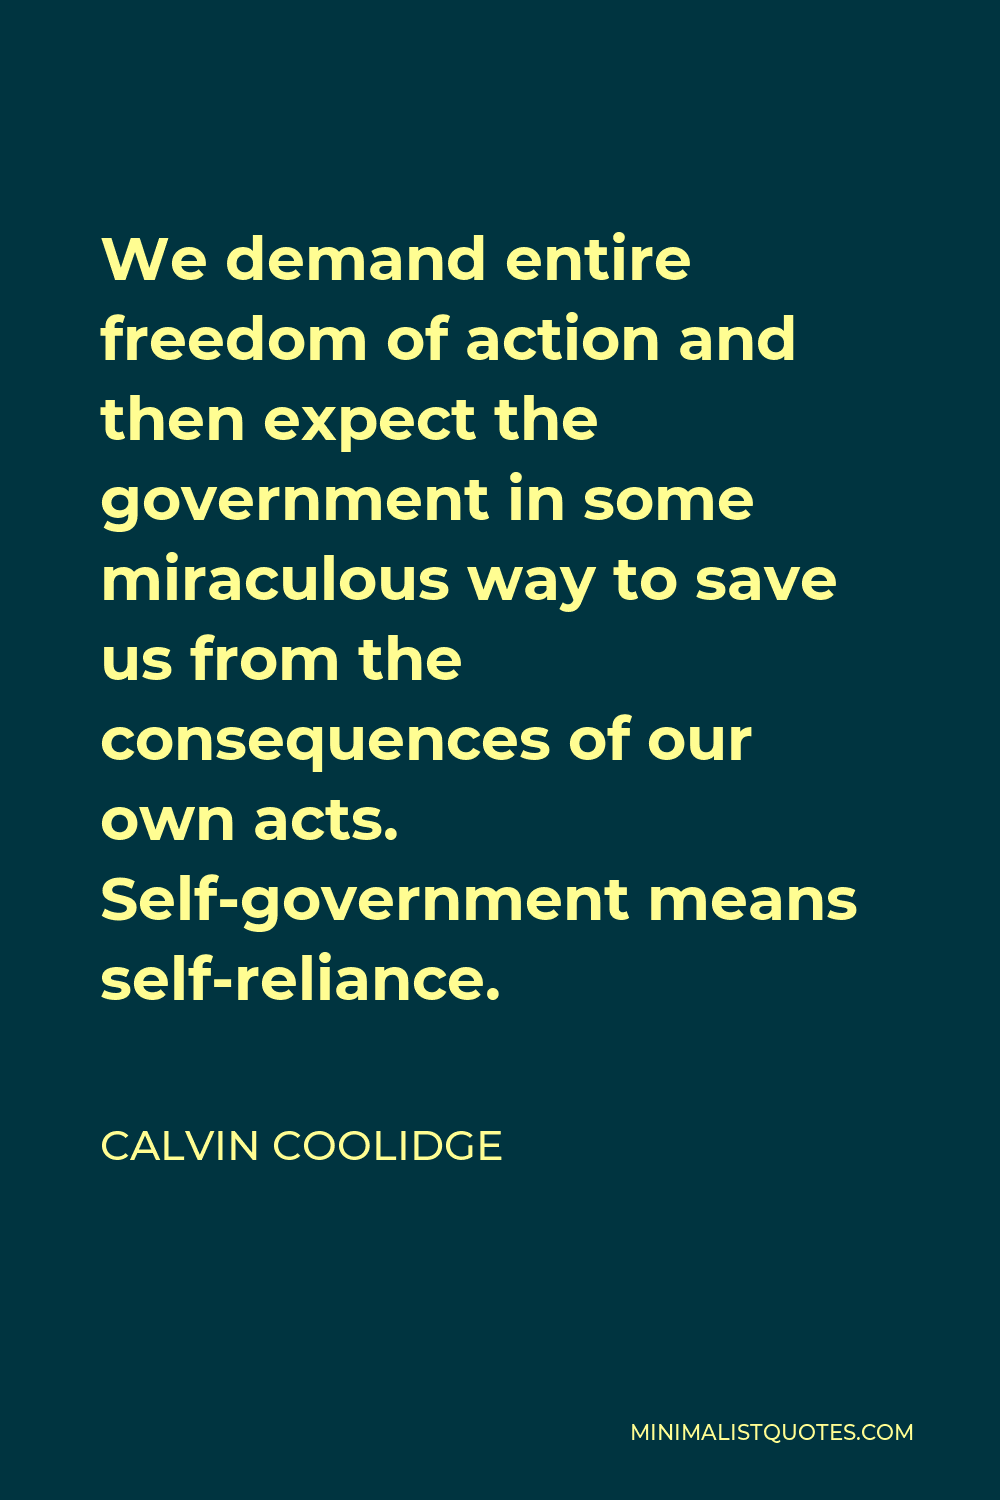 Calvin Coolidge Quote - We demand entire freedom of action and then expect the government in some miraculous way to save us from the consequences of our own acts. Self-government means self-reliance.